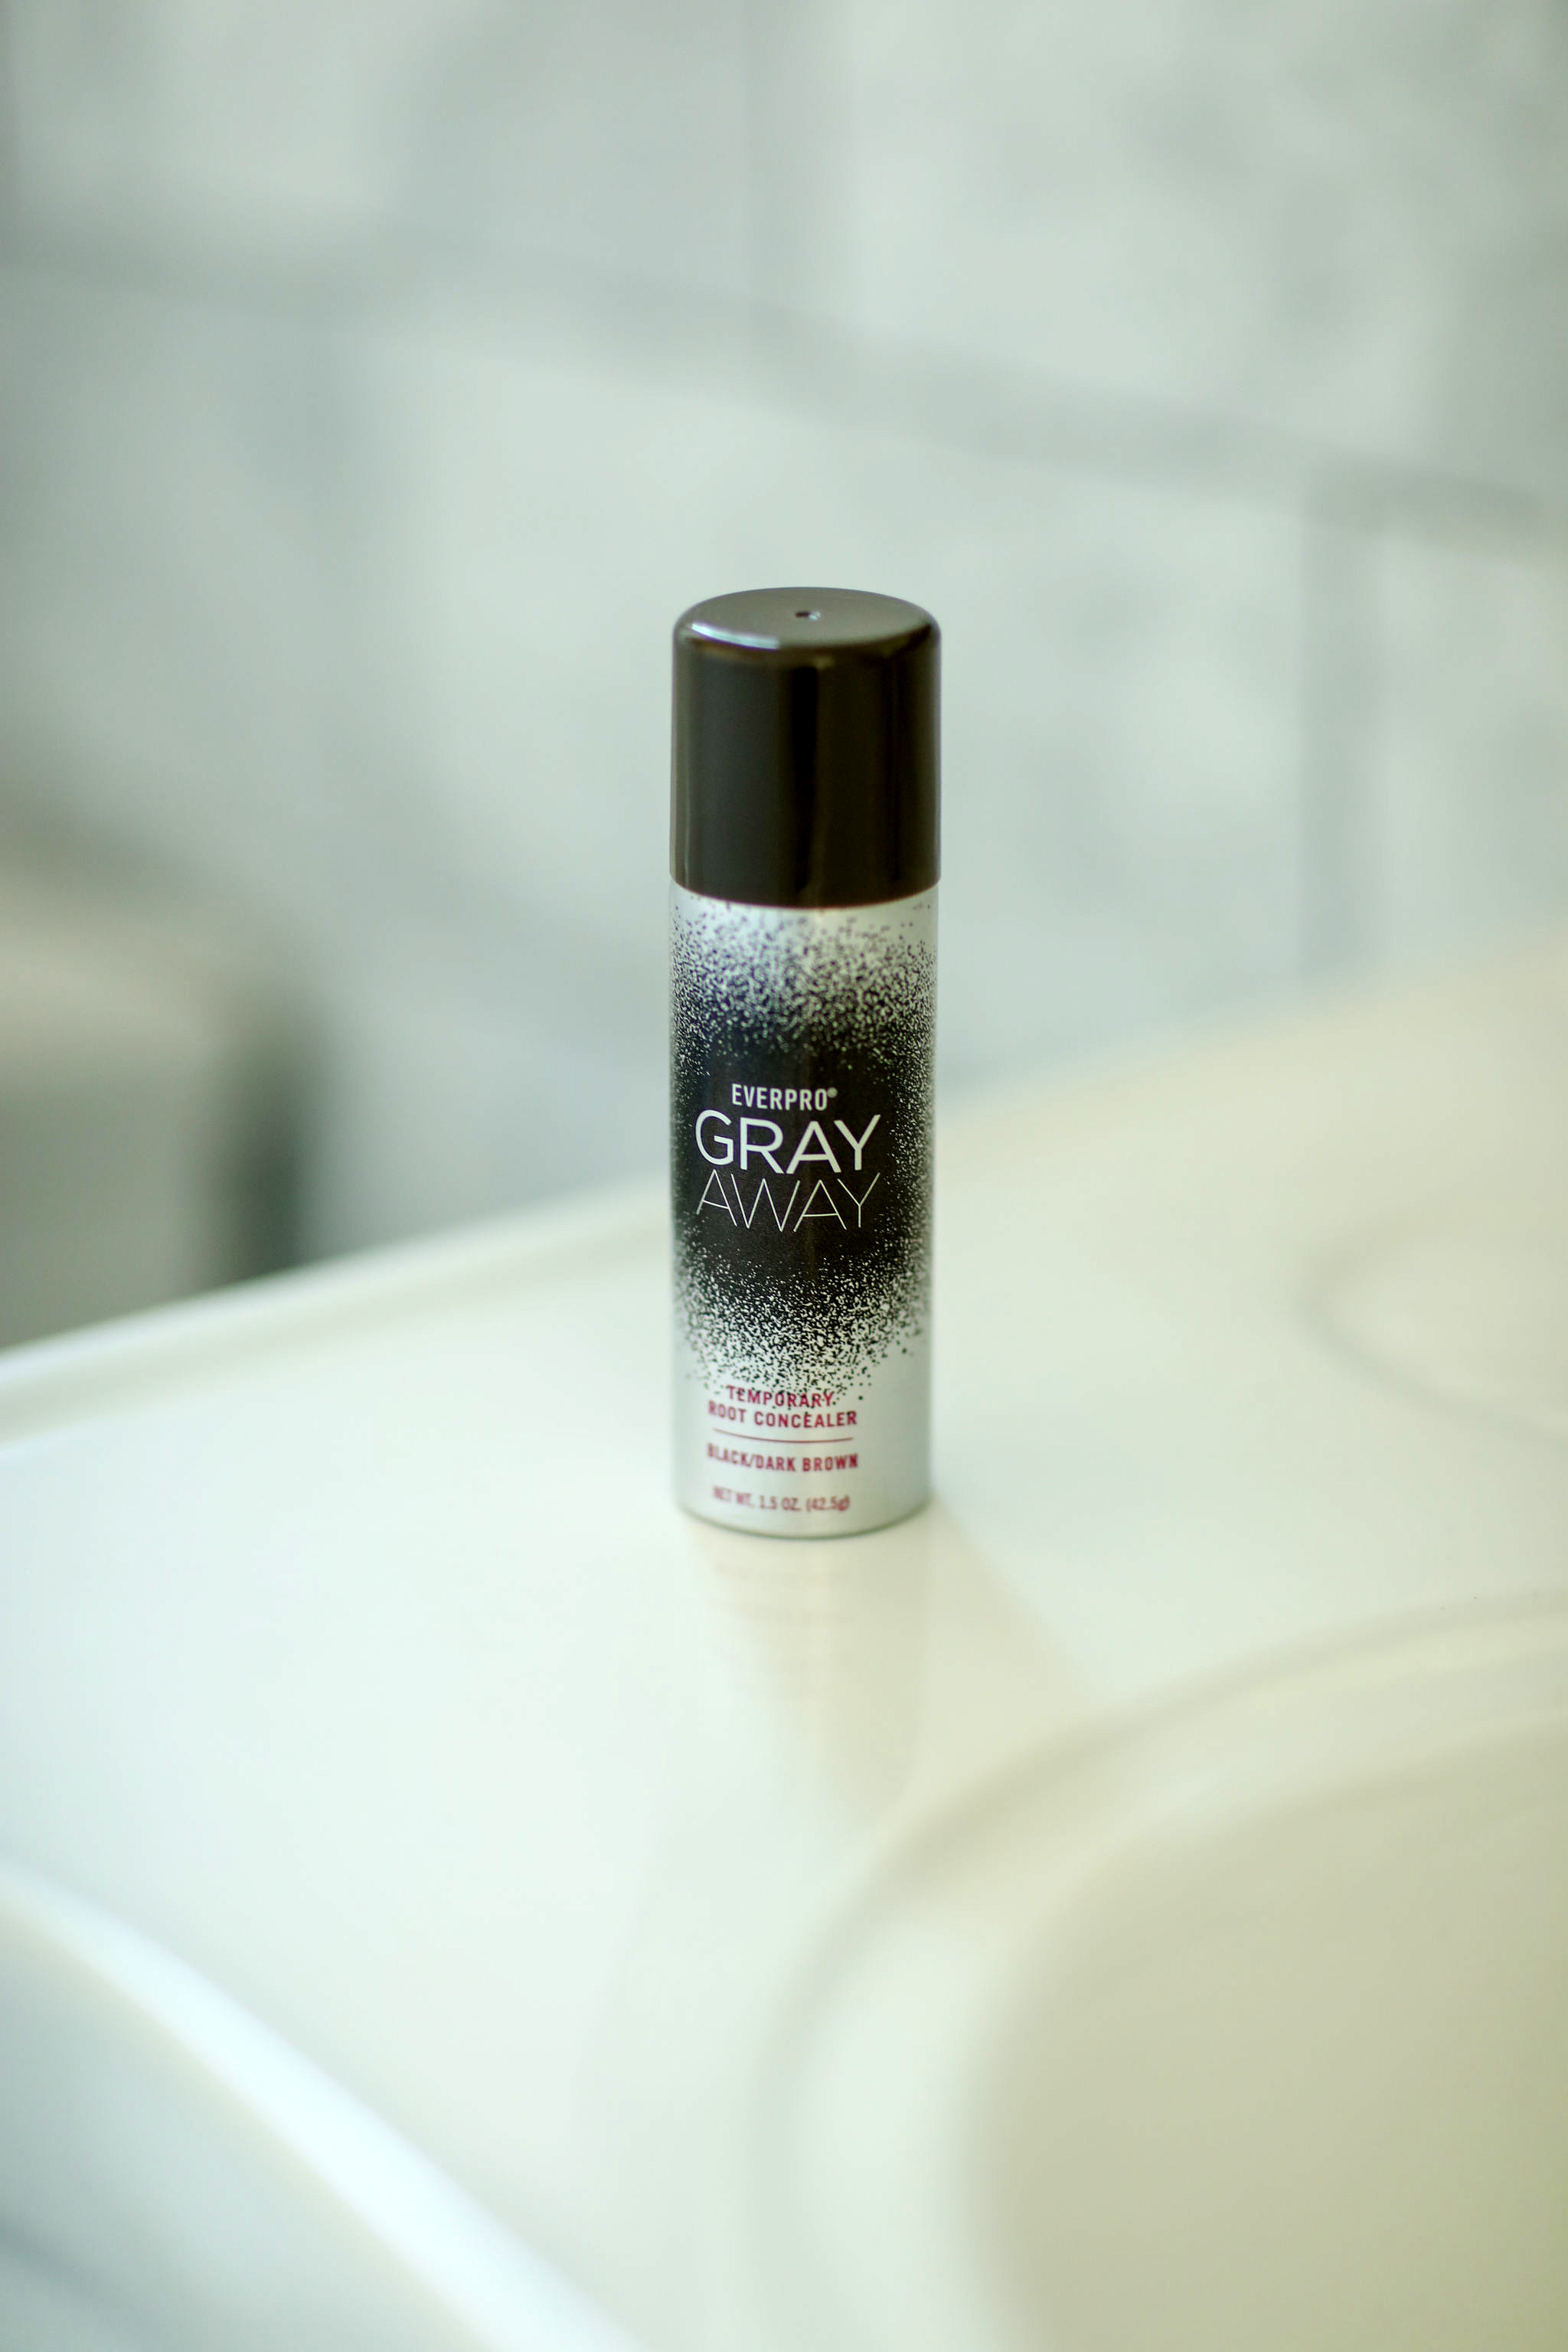 Want to cover those pesky gray hairs? Orange County Blogger Debbie Savage is sharing her top two ways to cover gray hairs like a pro. See them HERE!